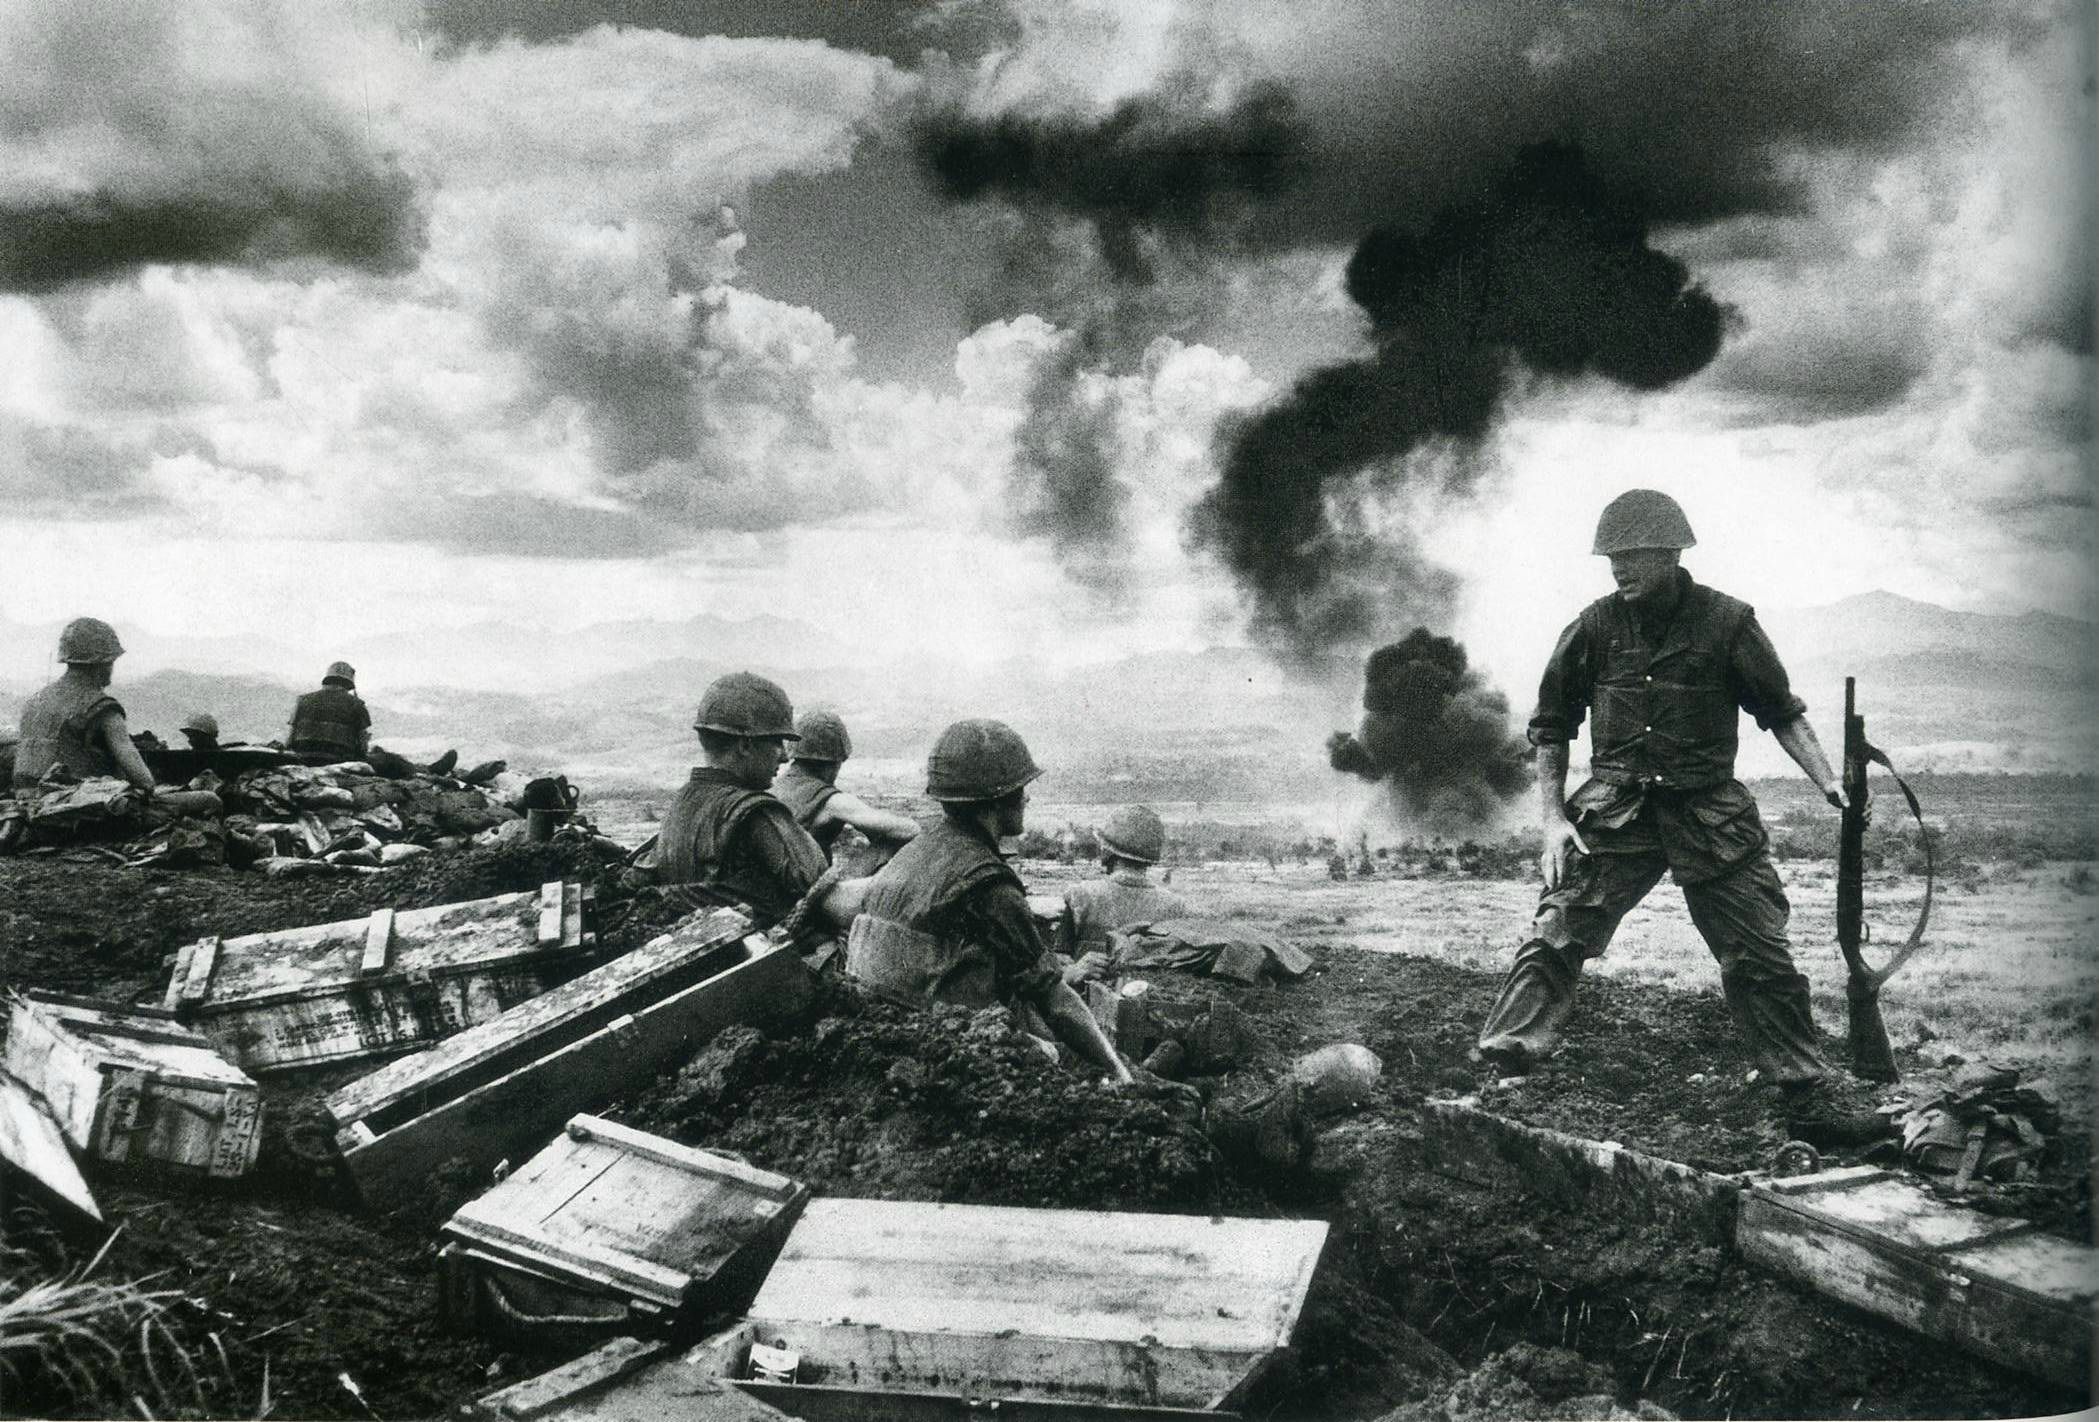 Khe Sanh, Vietnam, 1968                 The Battle of Khe Sanh began on January 21, 1968. For the next 77 days, U.S. Marines and their South Vietnamese allies fought off an intense siege of the garrison, in one of the longest and bloodiest battles of the Vietnam War